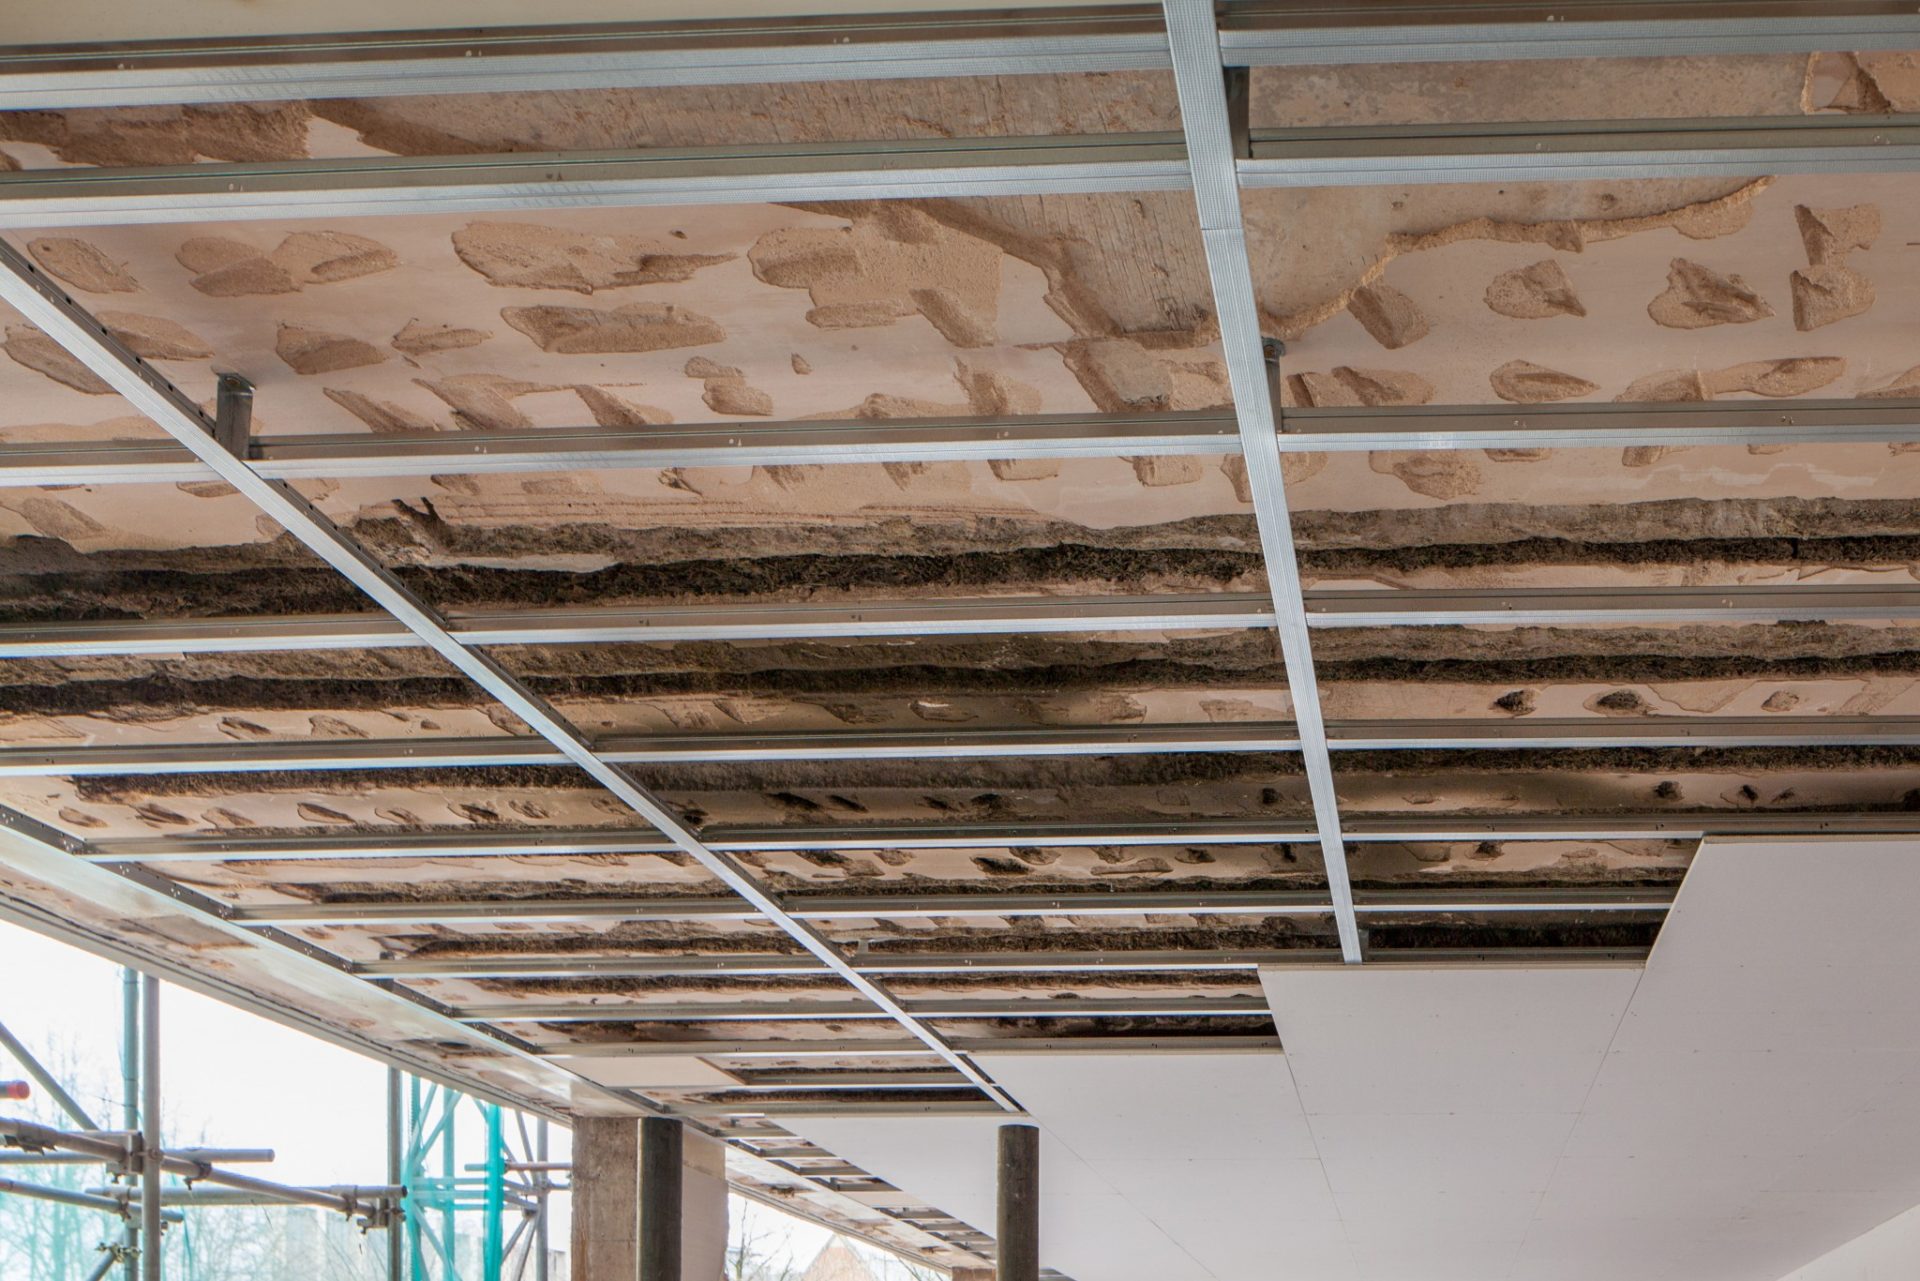 Knauf extends ceiling offering to customers